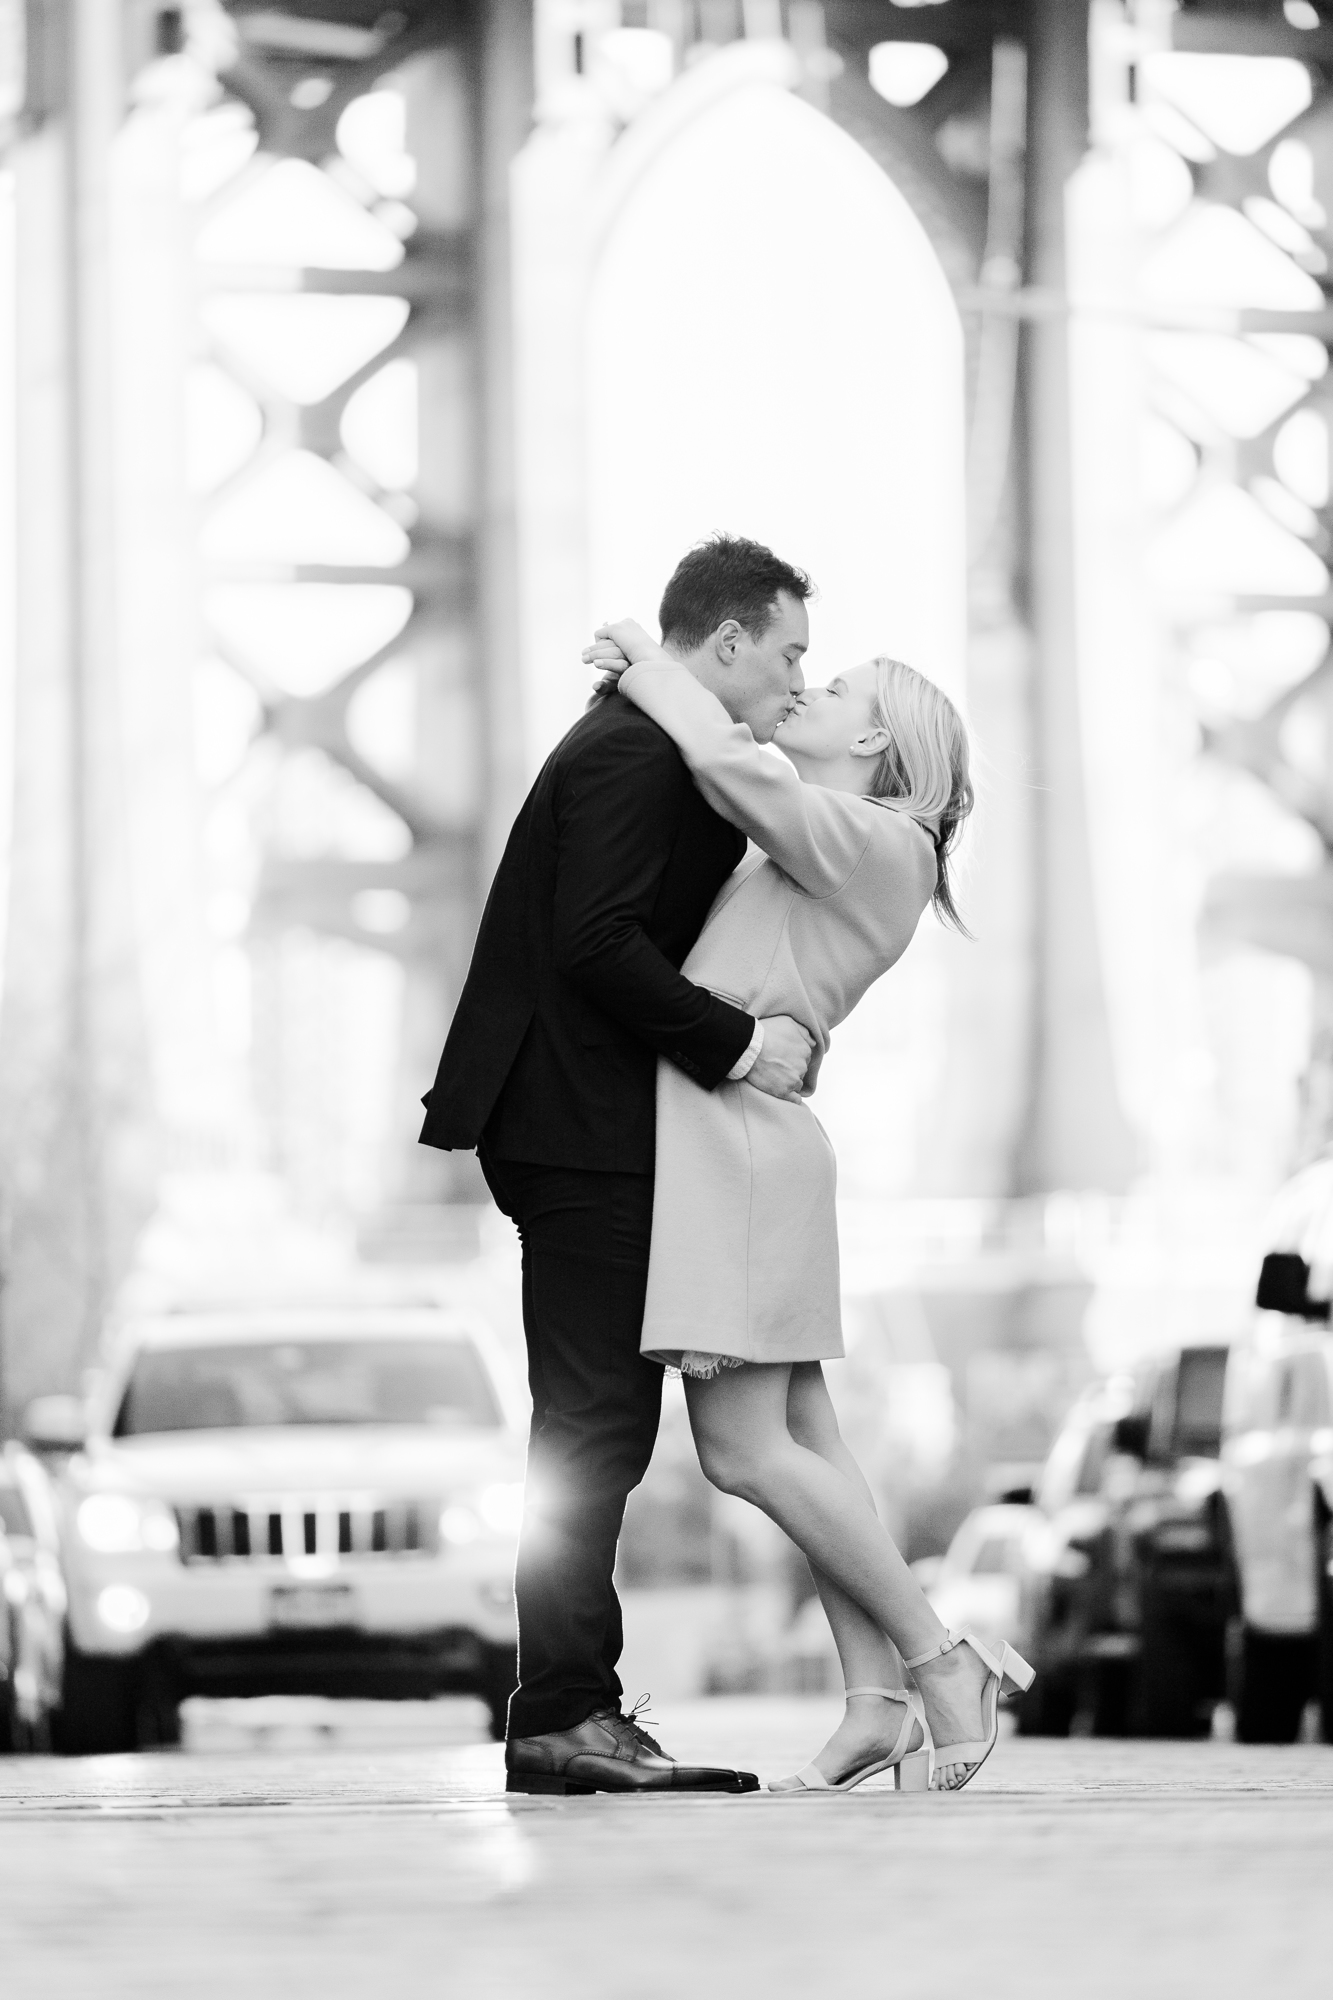 Intimate Brooklyn Bridge Engagement Photos in Late Fall